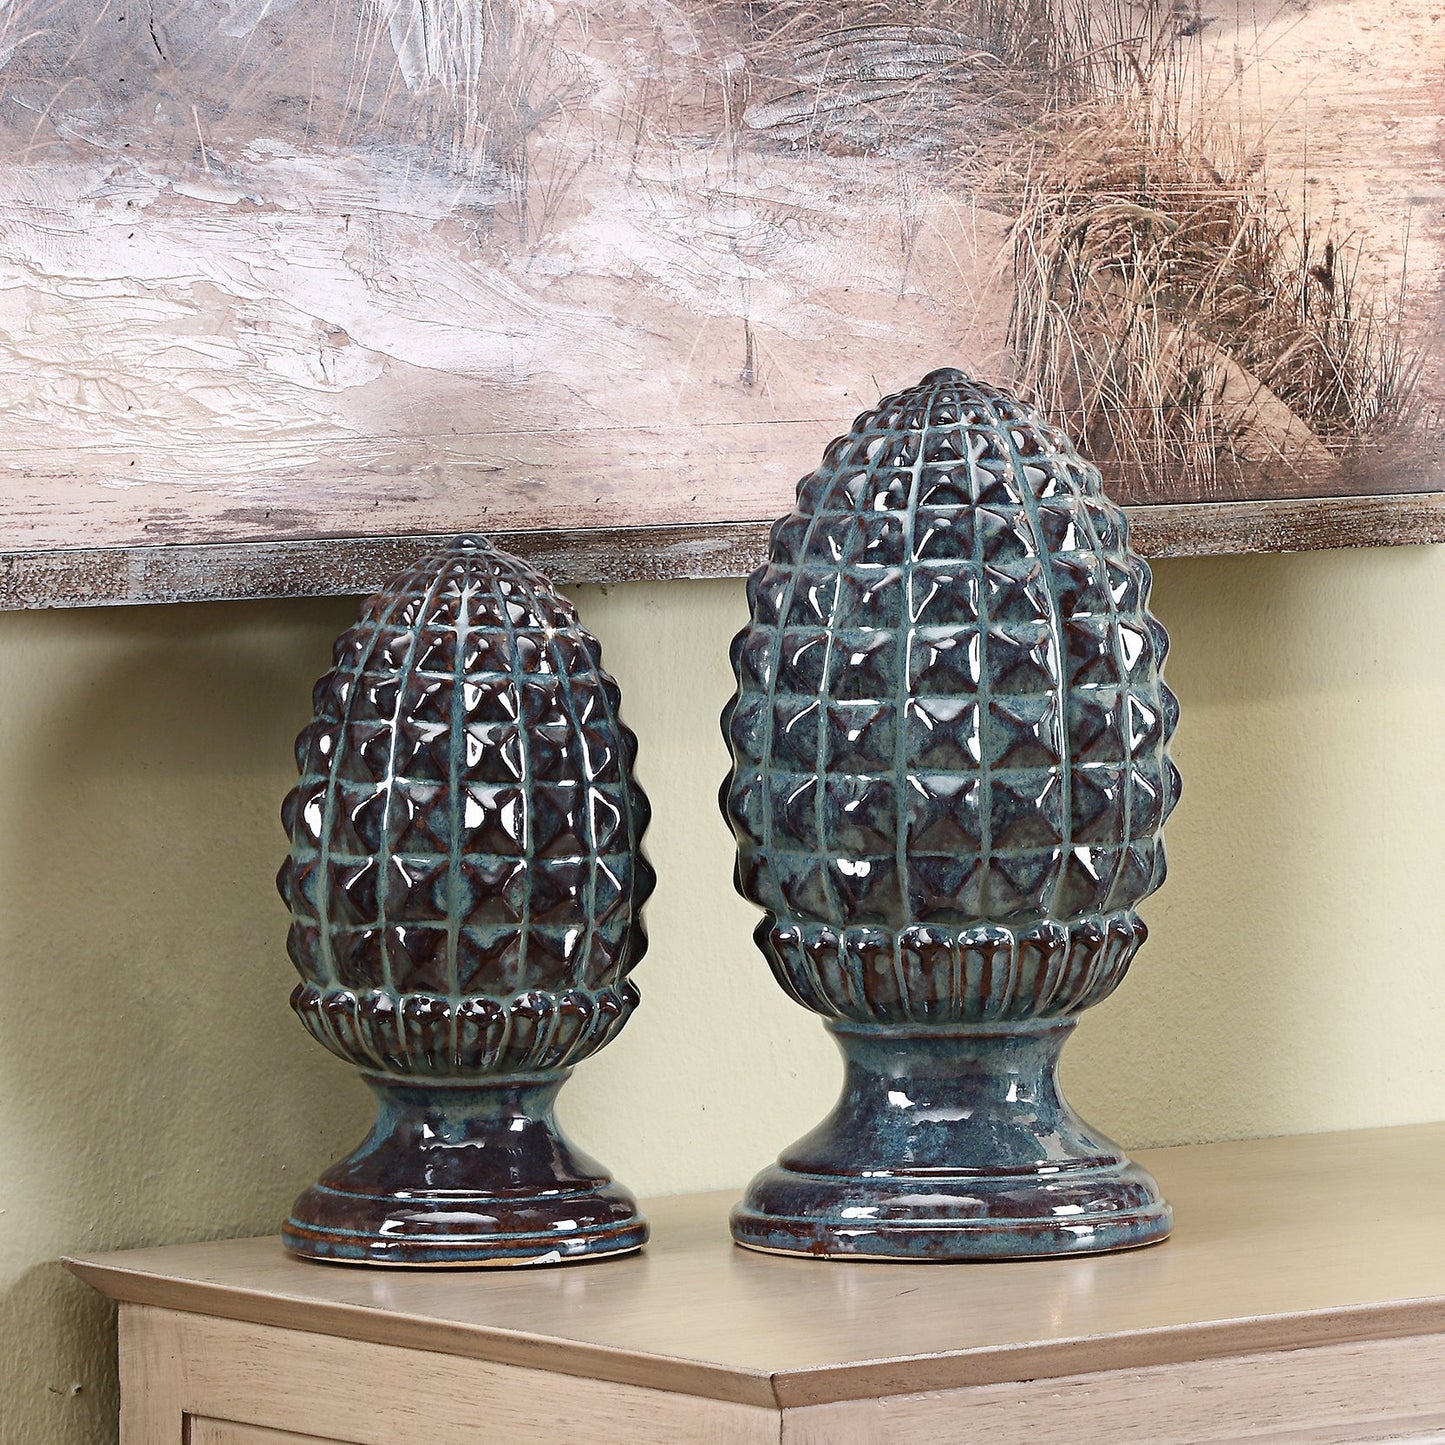 Crestview Collection Henley 13" & 11" Traditional Ceramic Pineapple Finials In Teal Marbled and Glazed Finish